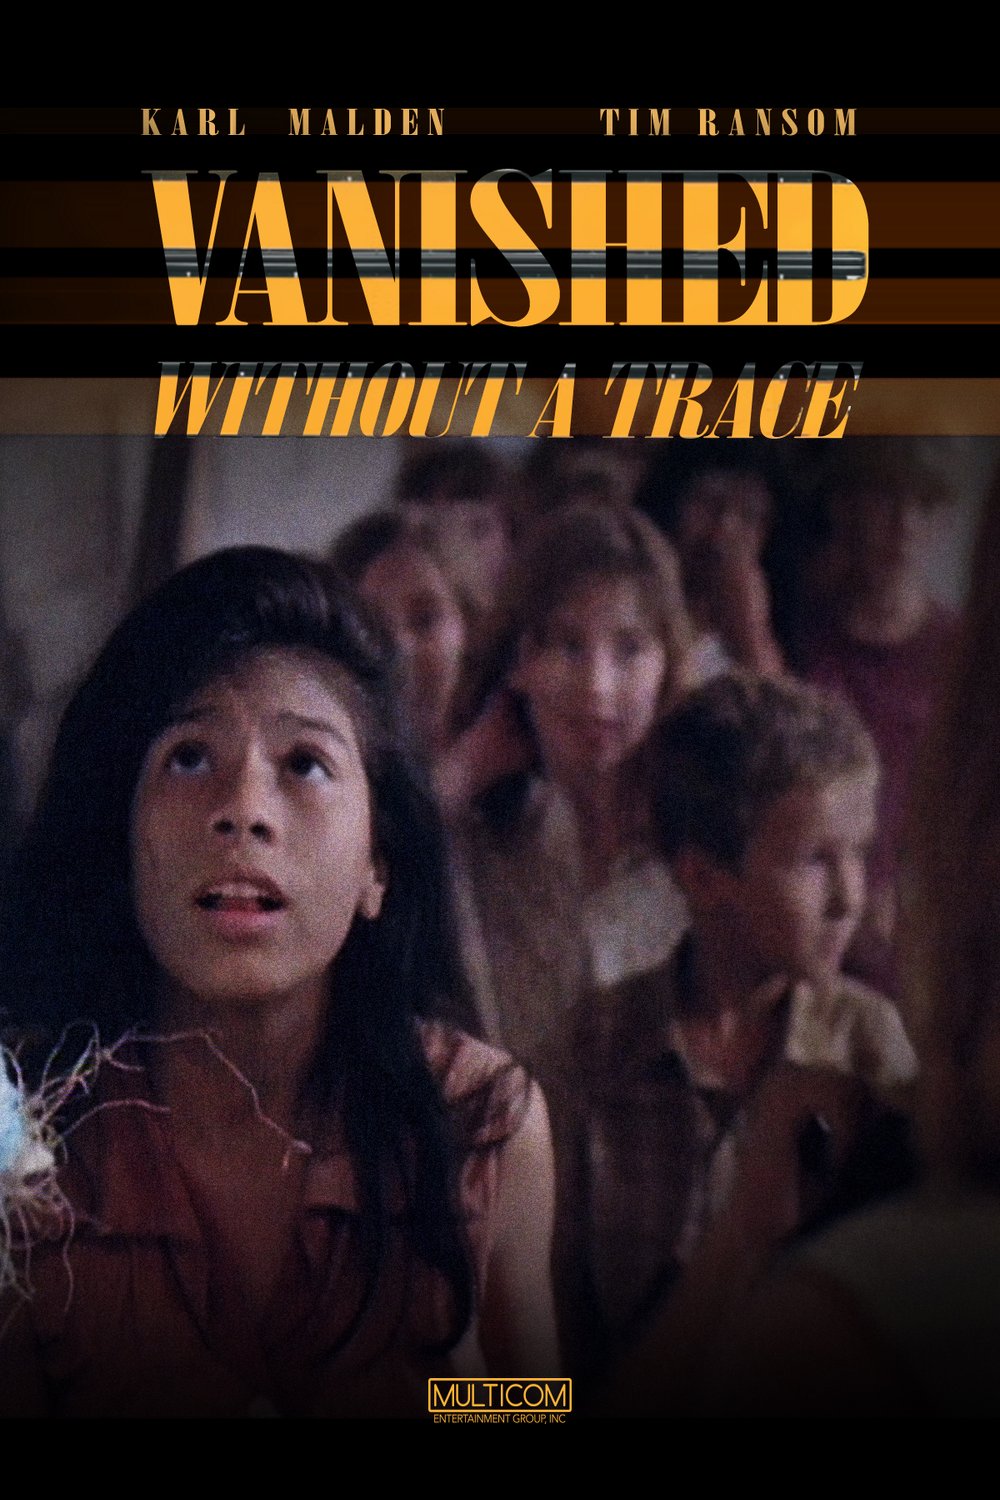 Poster of the movie Vanished Without a Trace